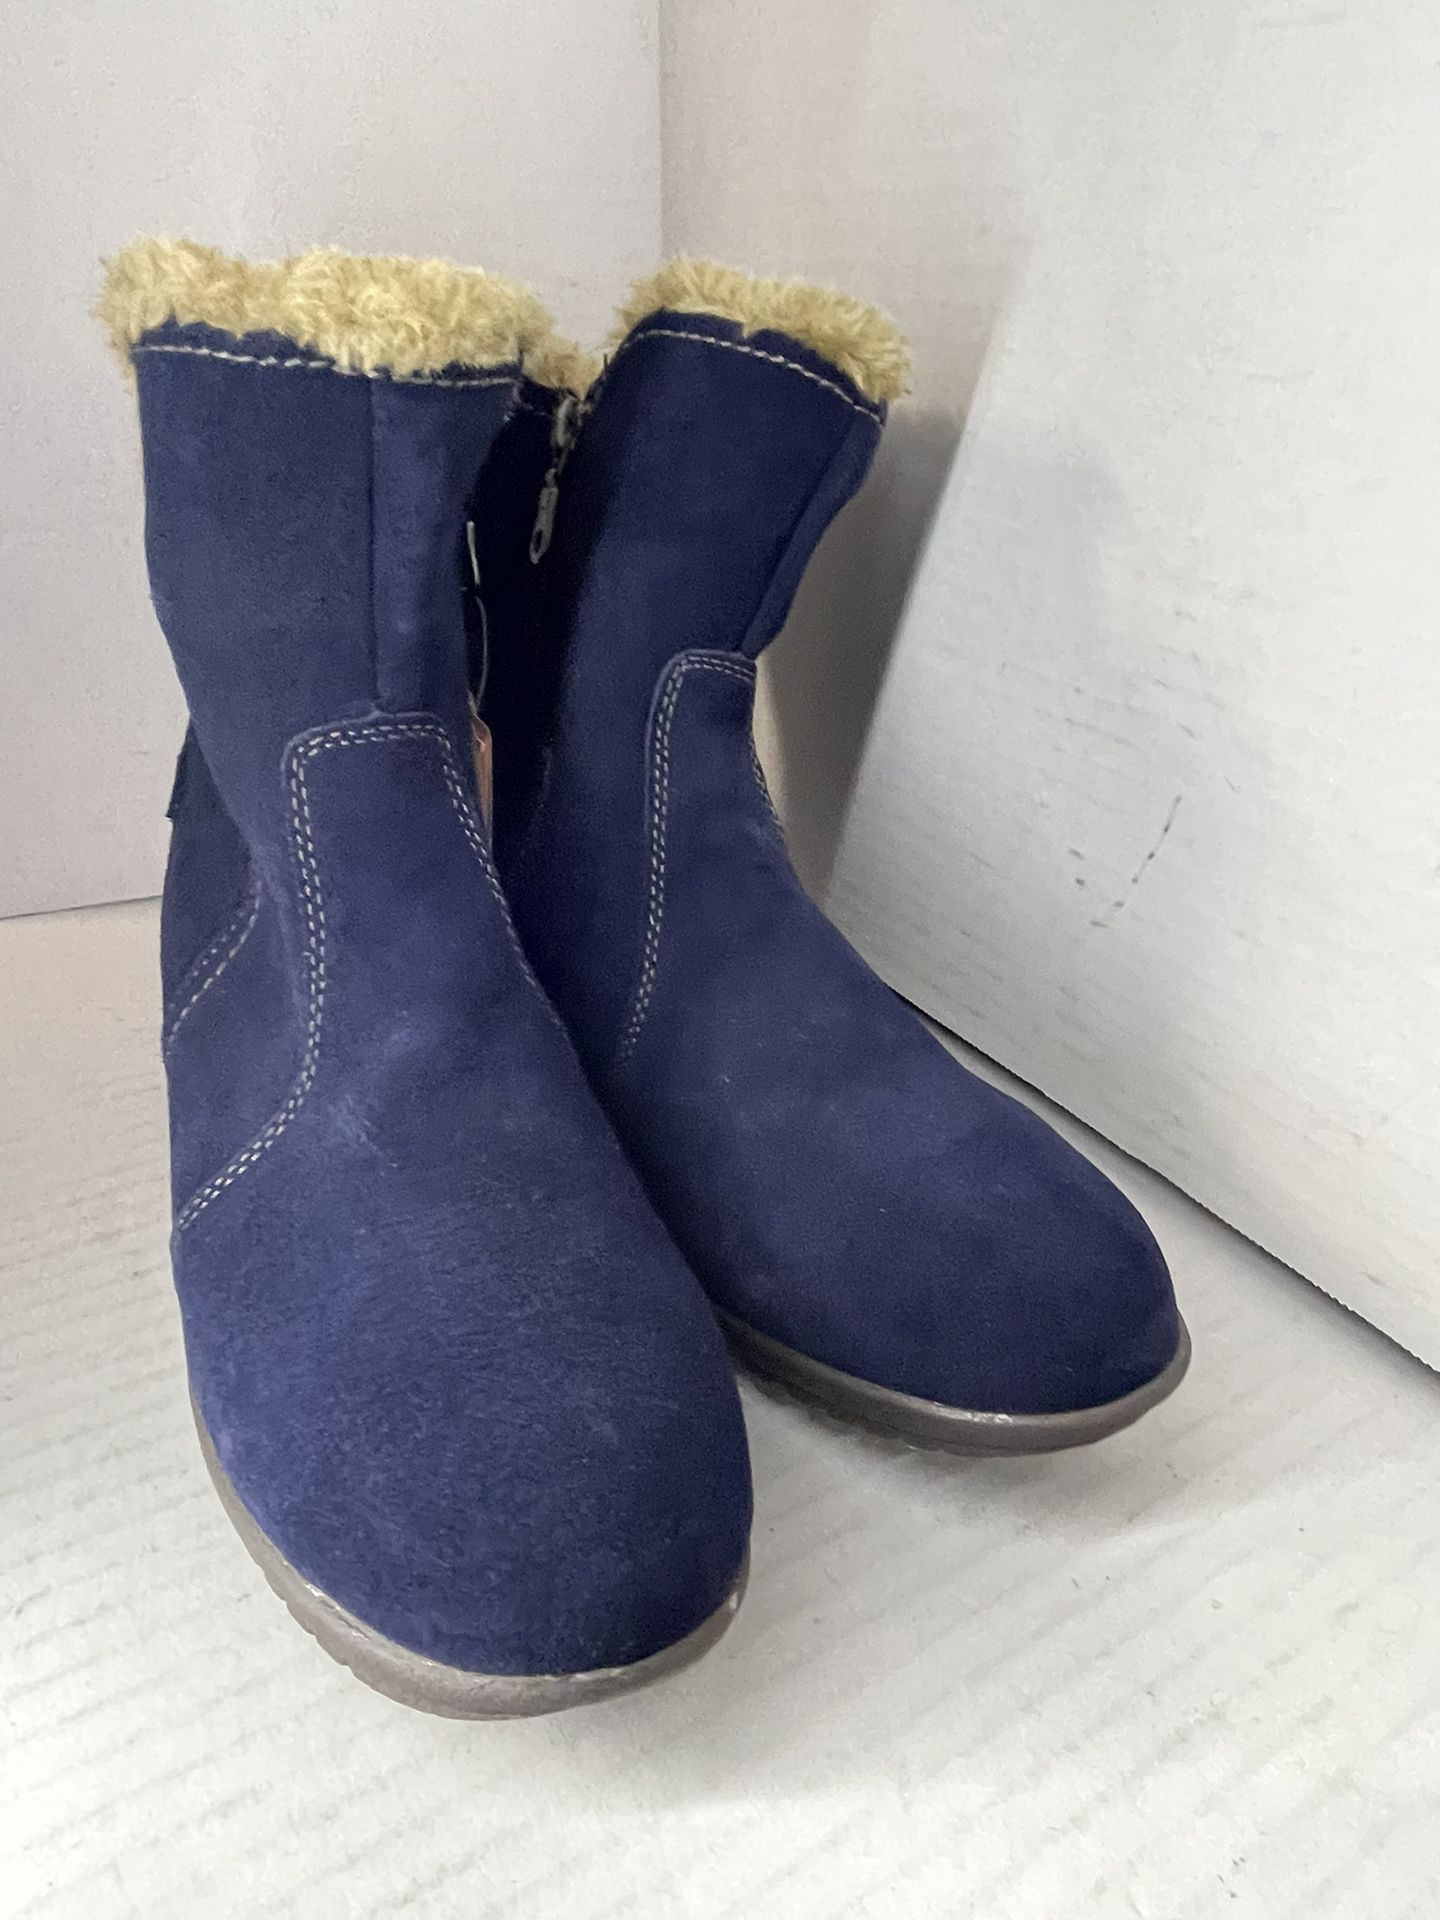 Sporto 7.5 W  Blue suede winter snow ankle boots girl